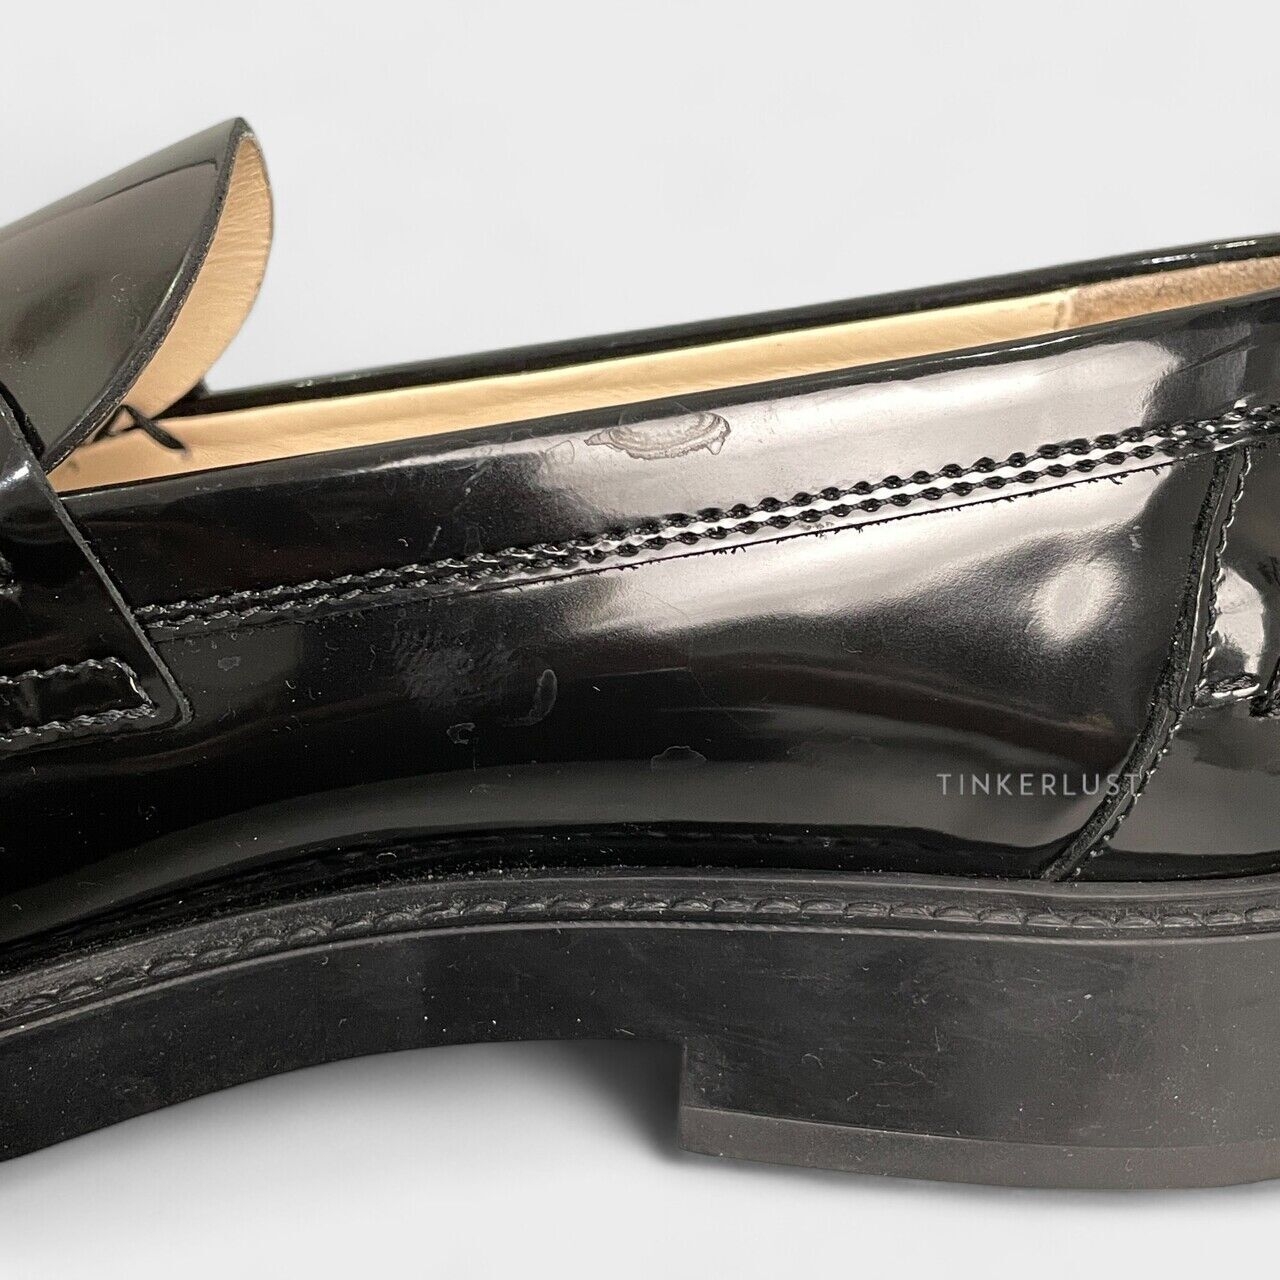 Tod's Gomma Basso Black Patent Loafers